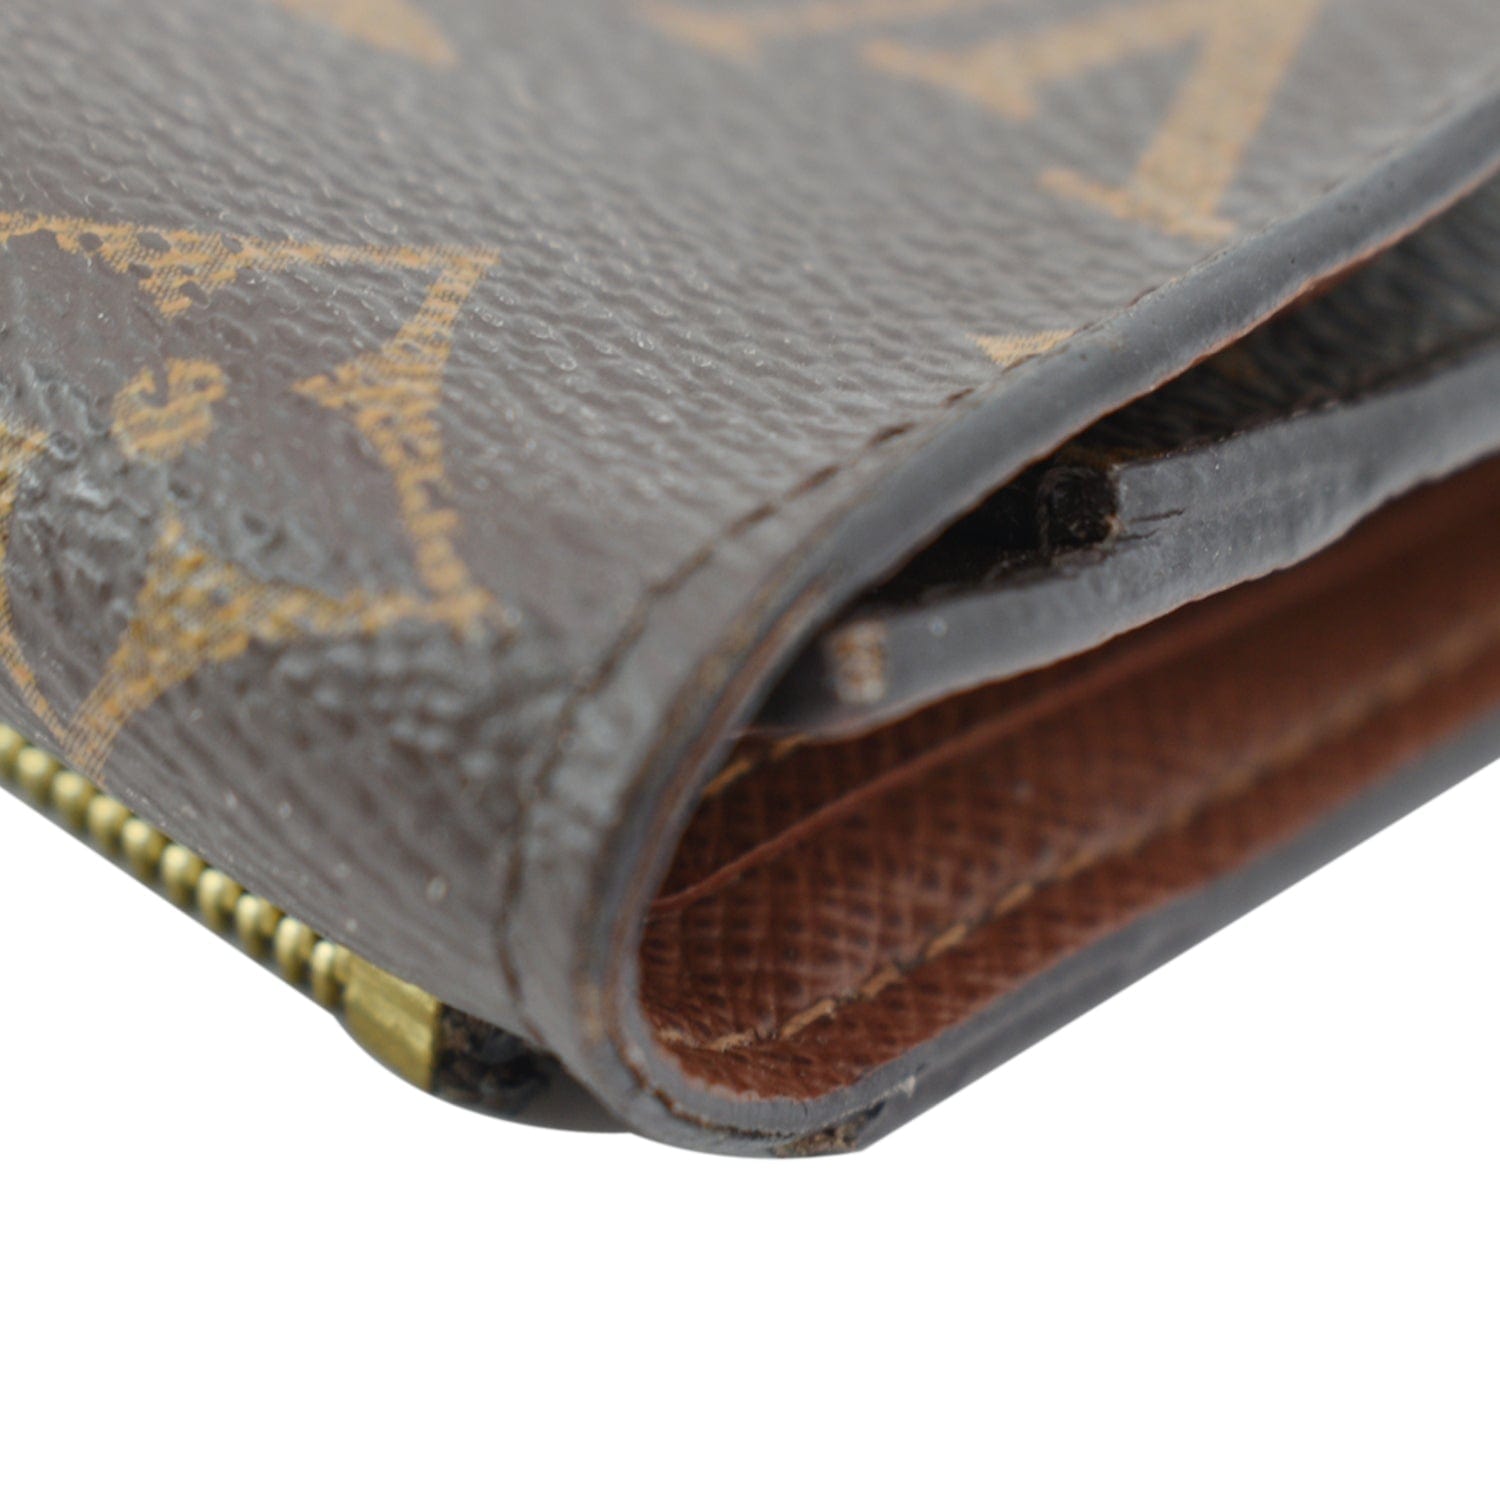 Wallet Louis Vuitton Brown in Not specified - 25290241